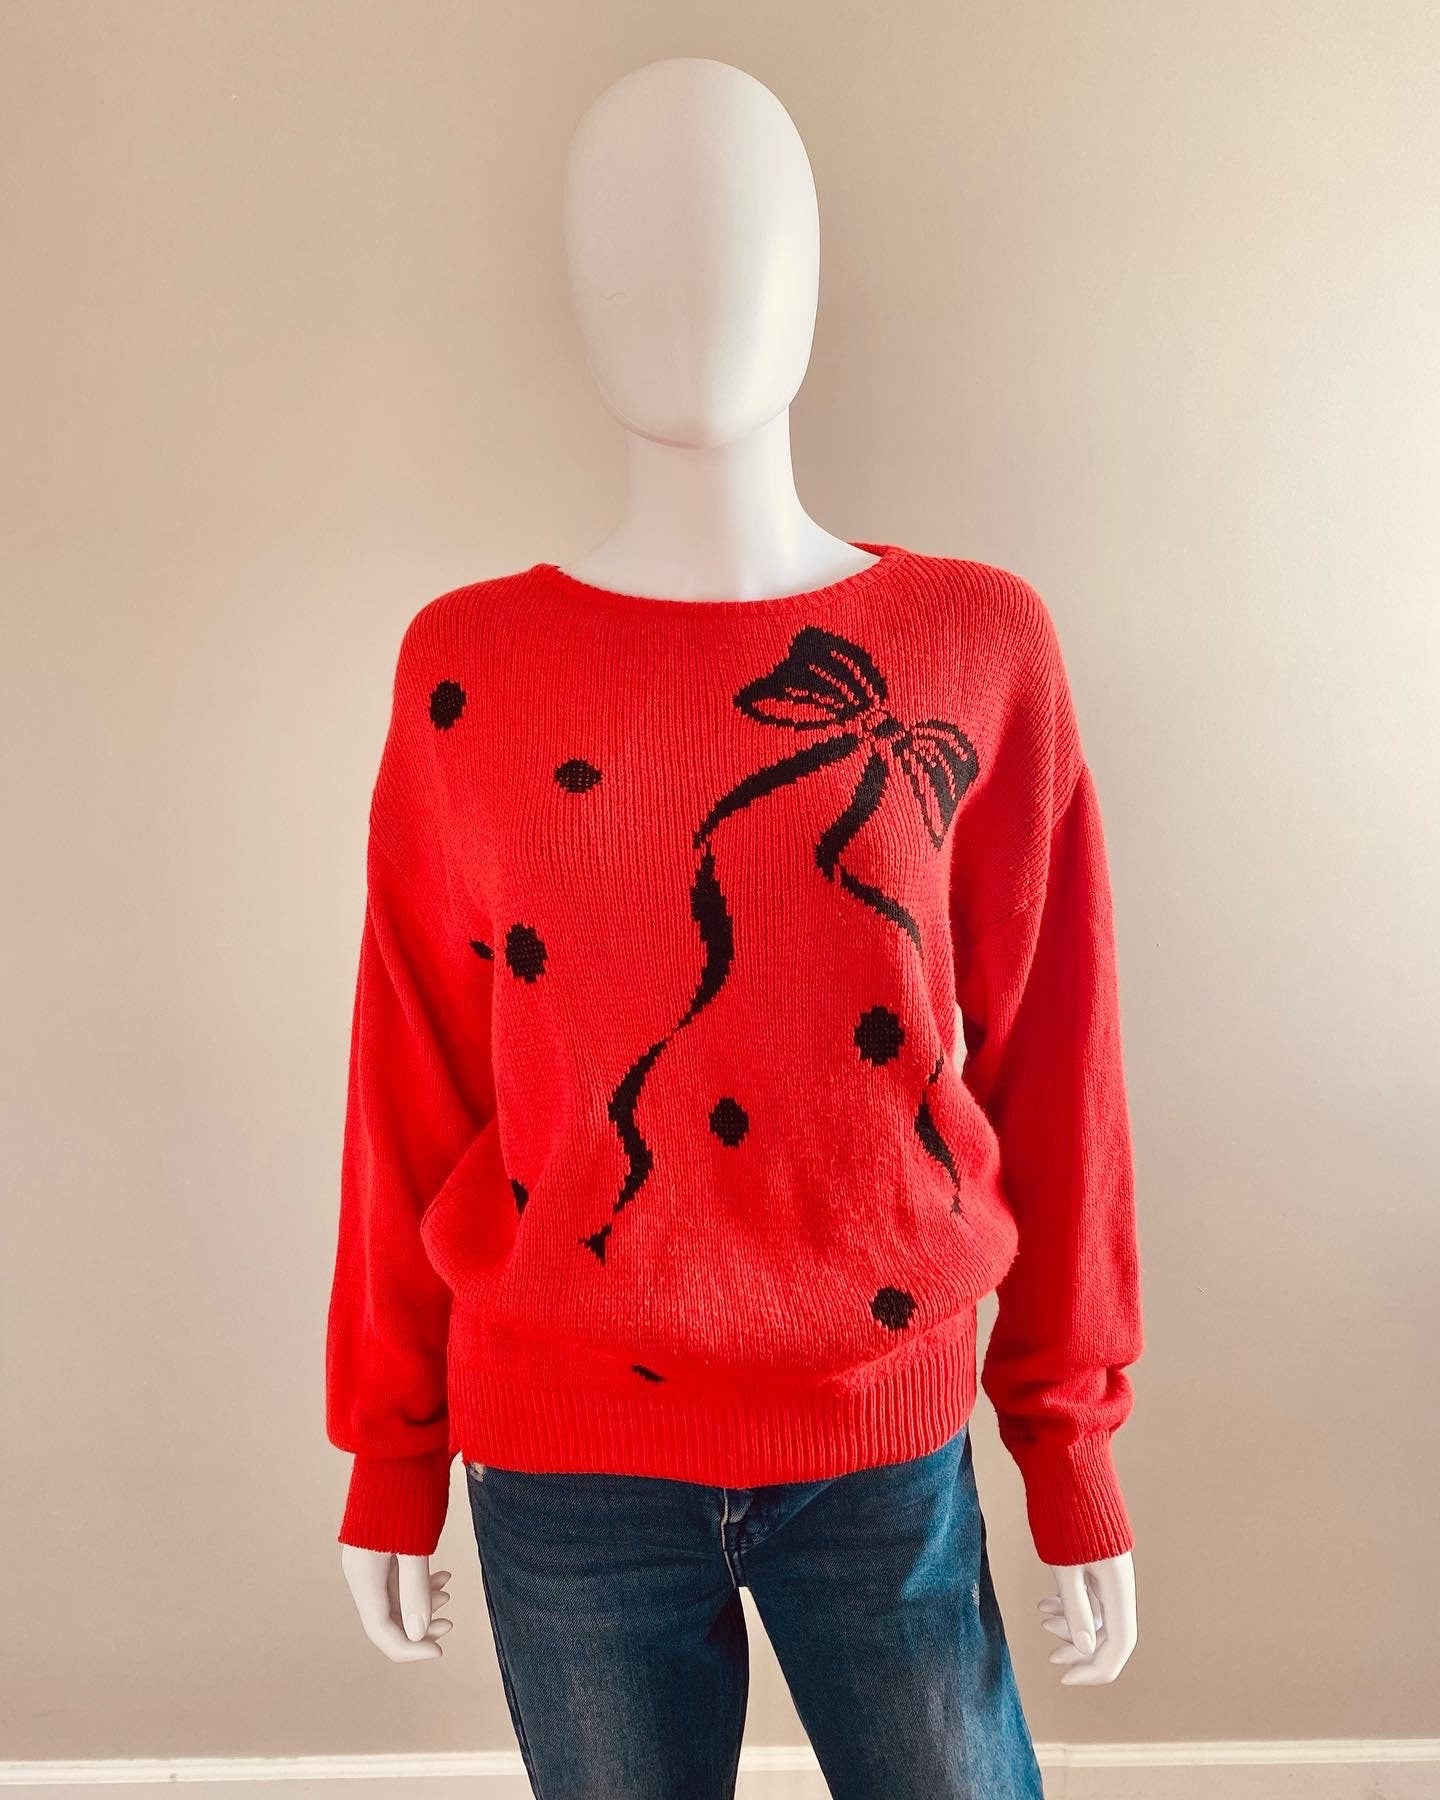 Vintage 1980s Red Novelty Print Sweater / 80s bow print sweater / holiday sweater / Intarsia sweater / Size XS to M